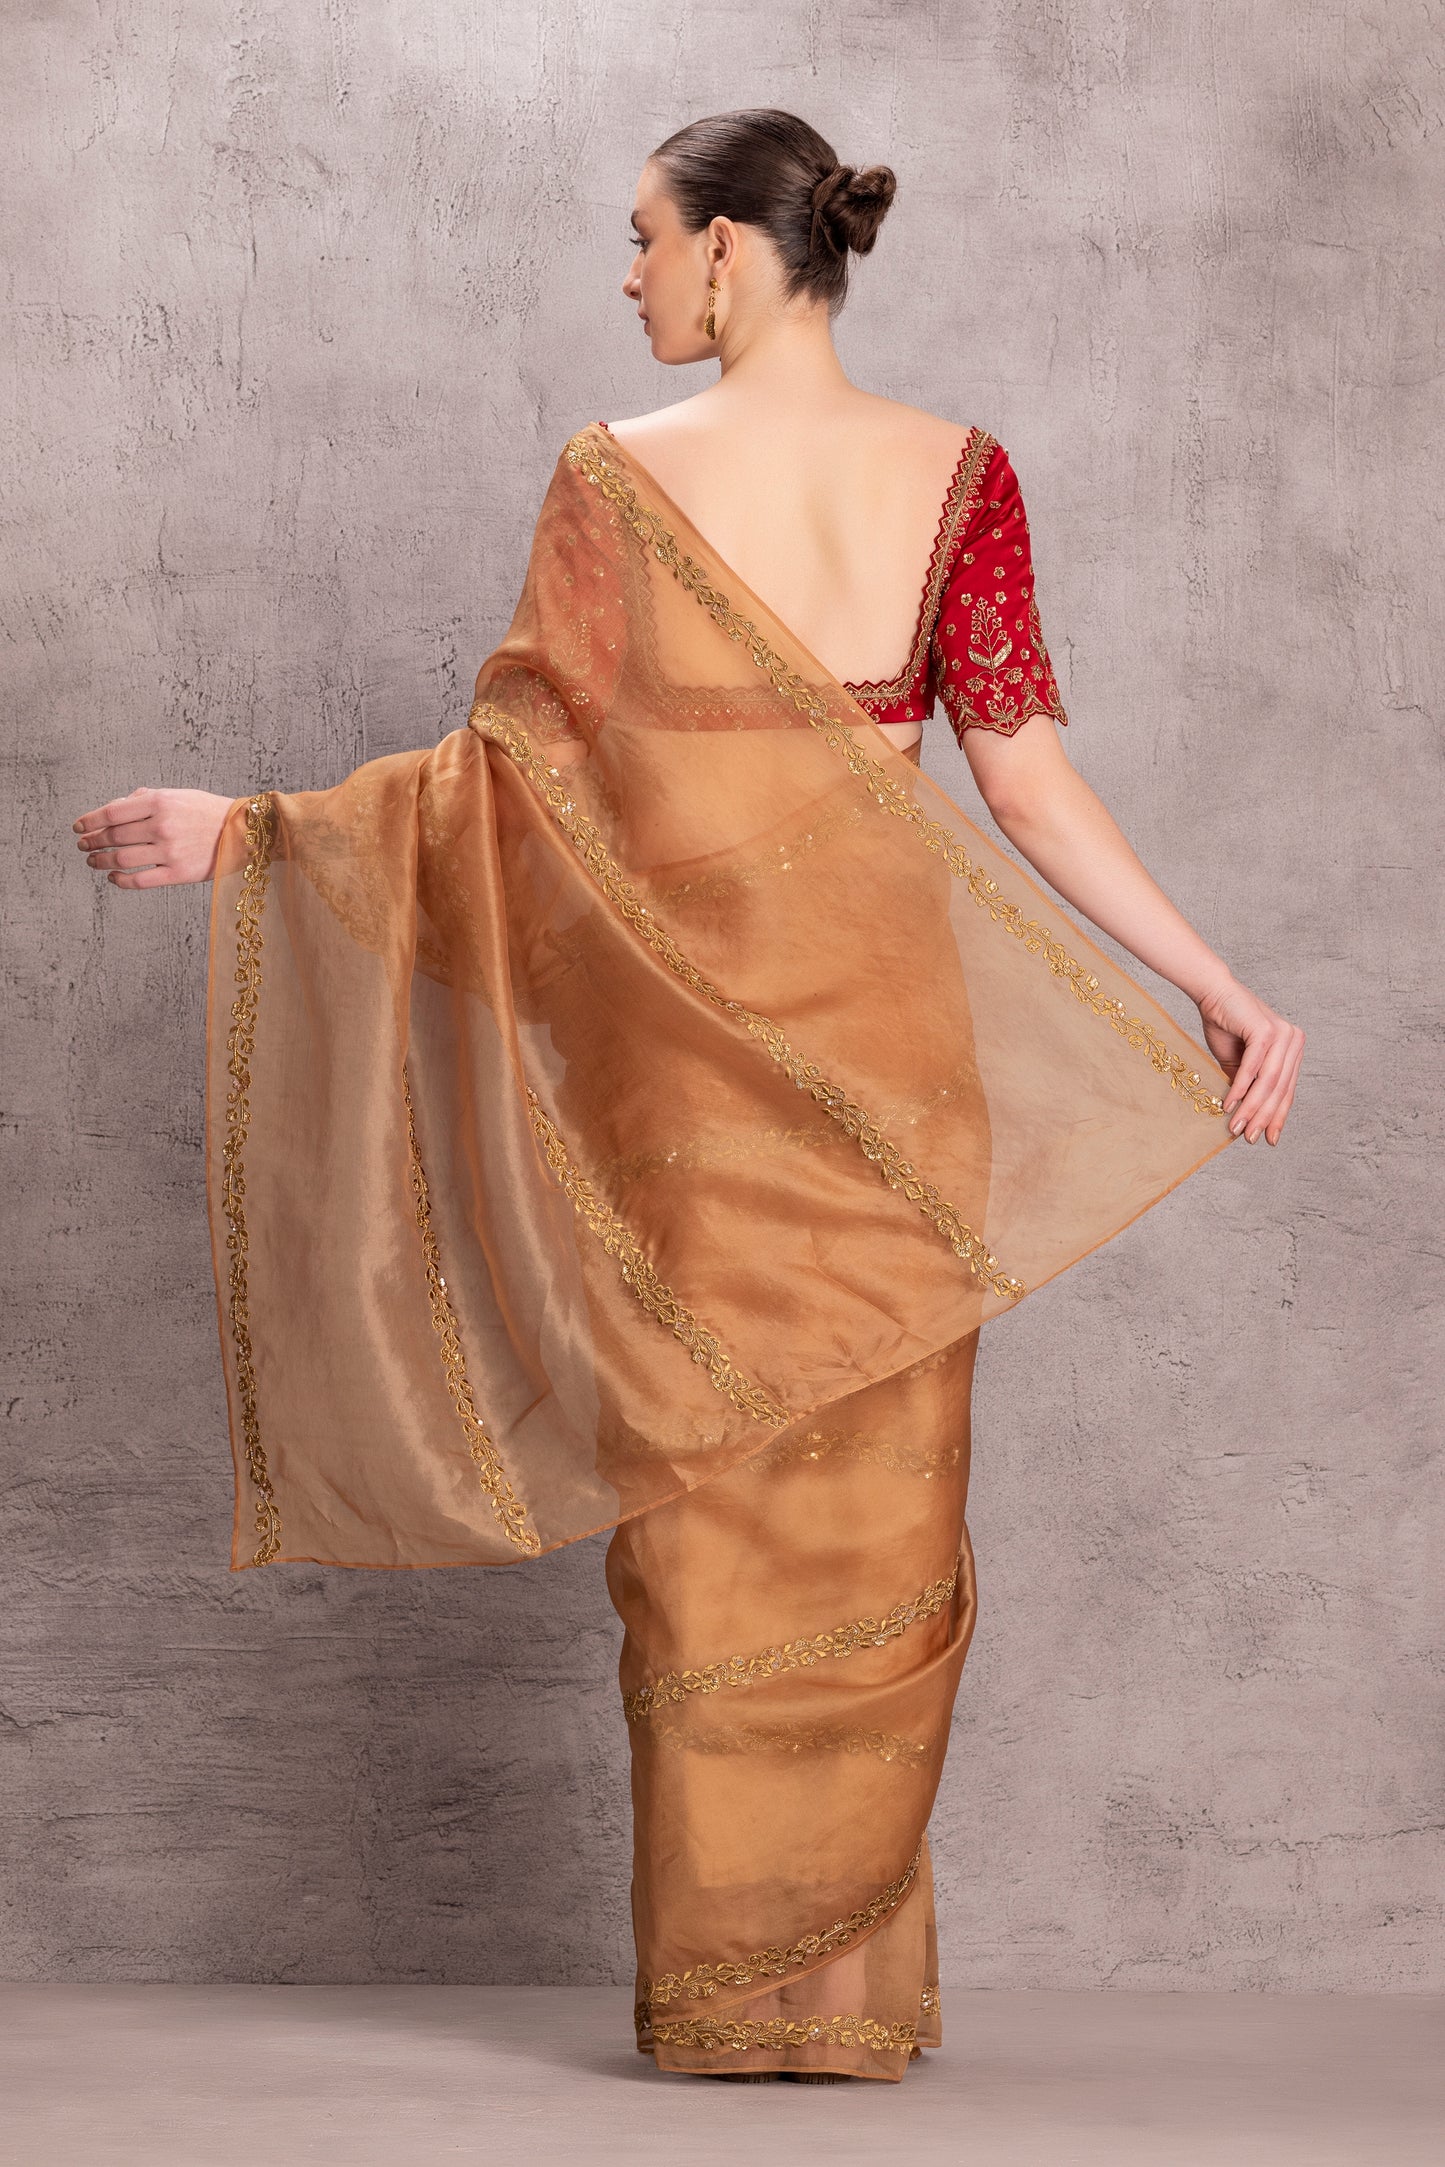 Golden Organza Saree comes With Satin Stitched Blouse & Organic Cotton Stitched Petticoat (3Pcs)